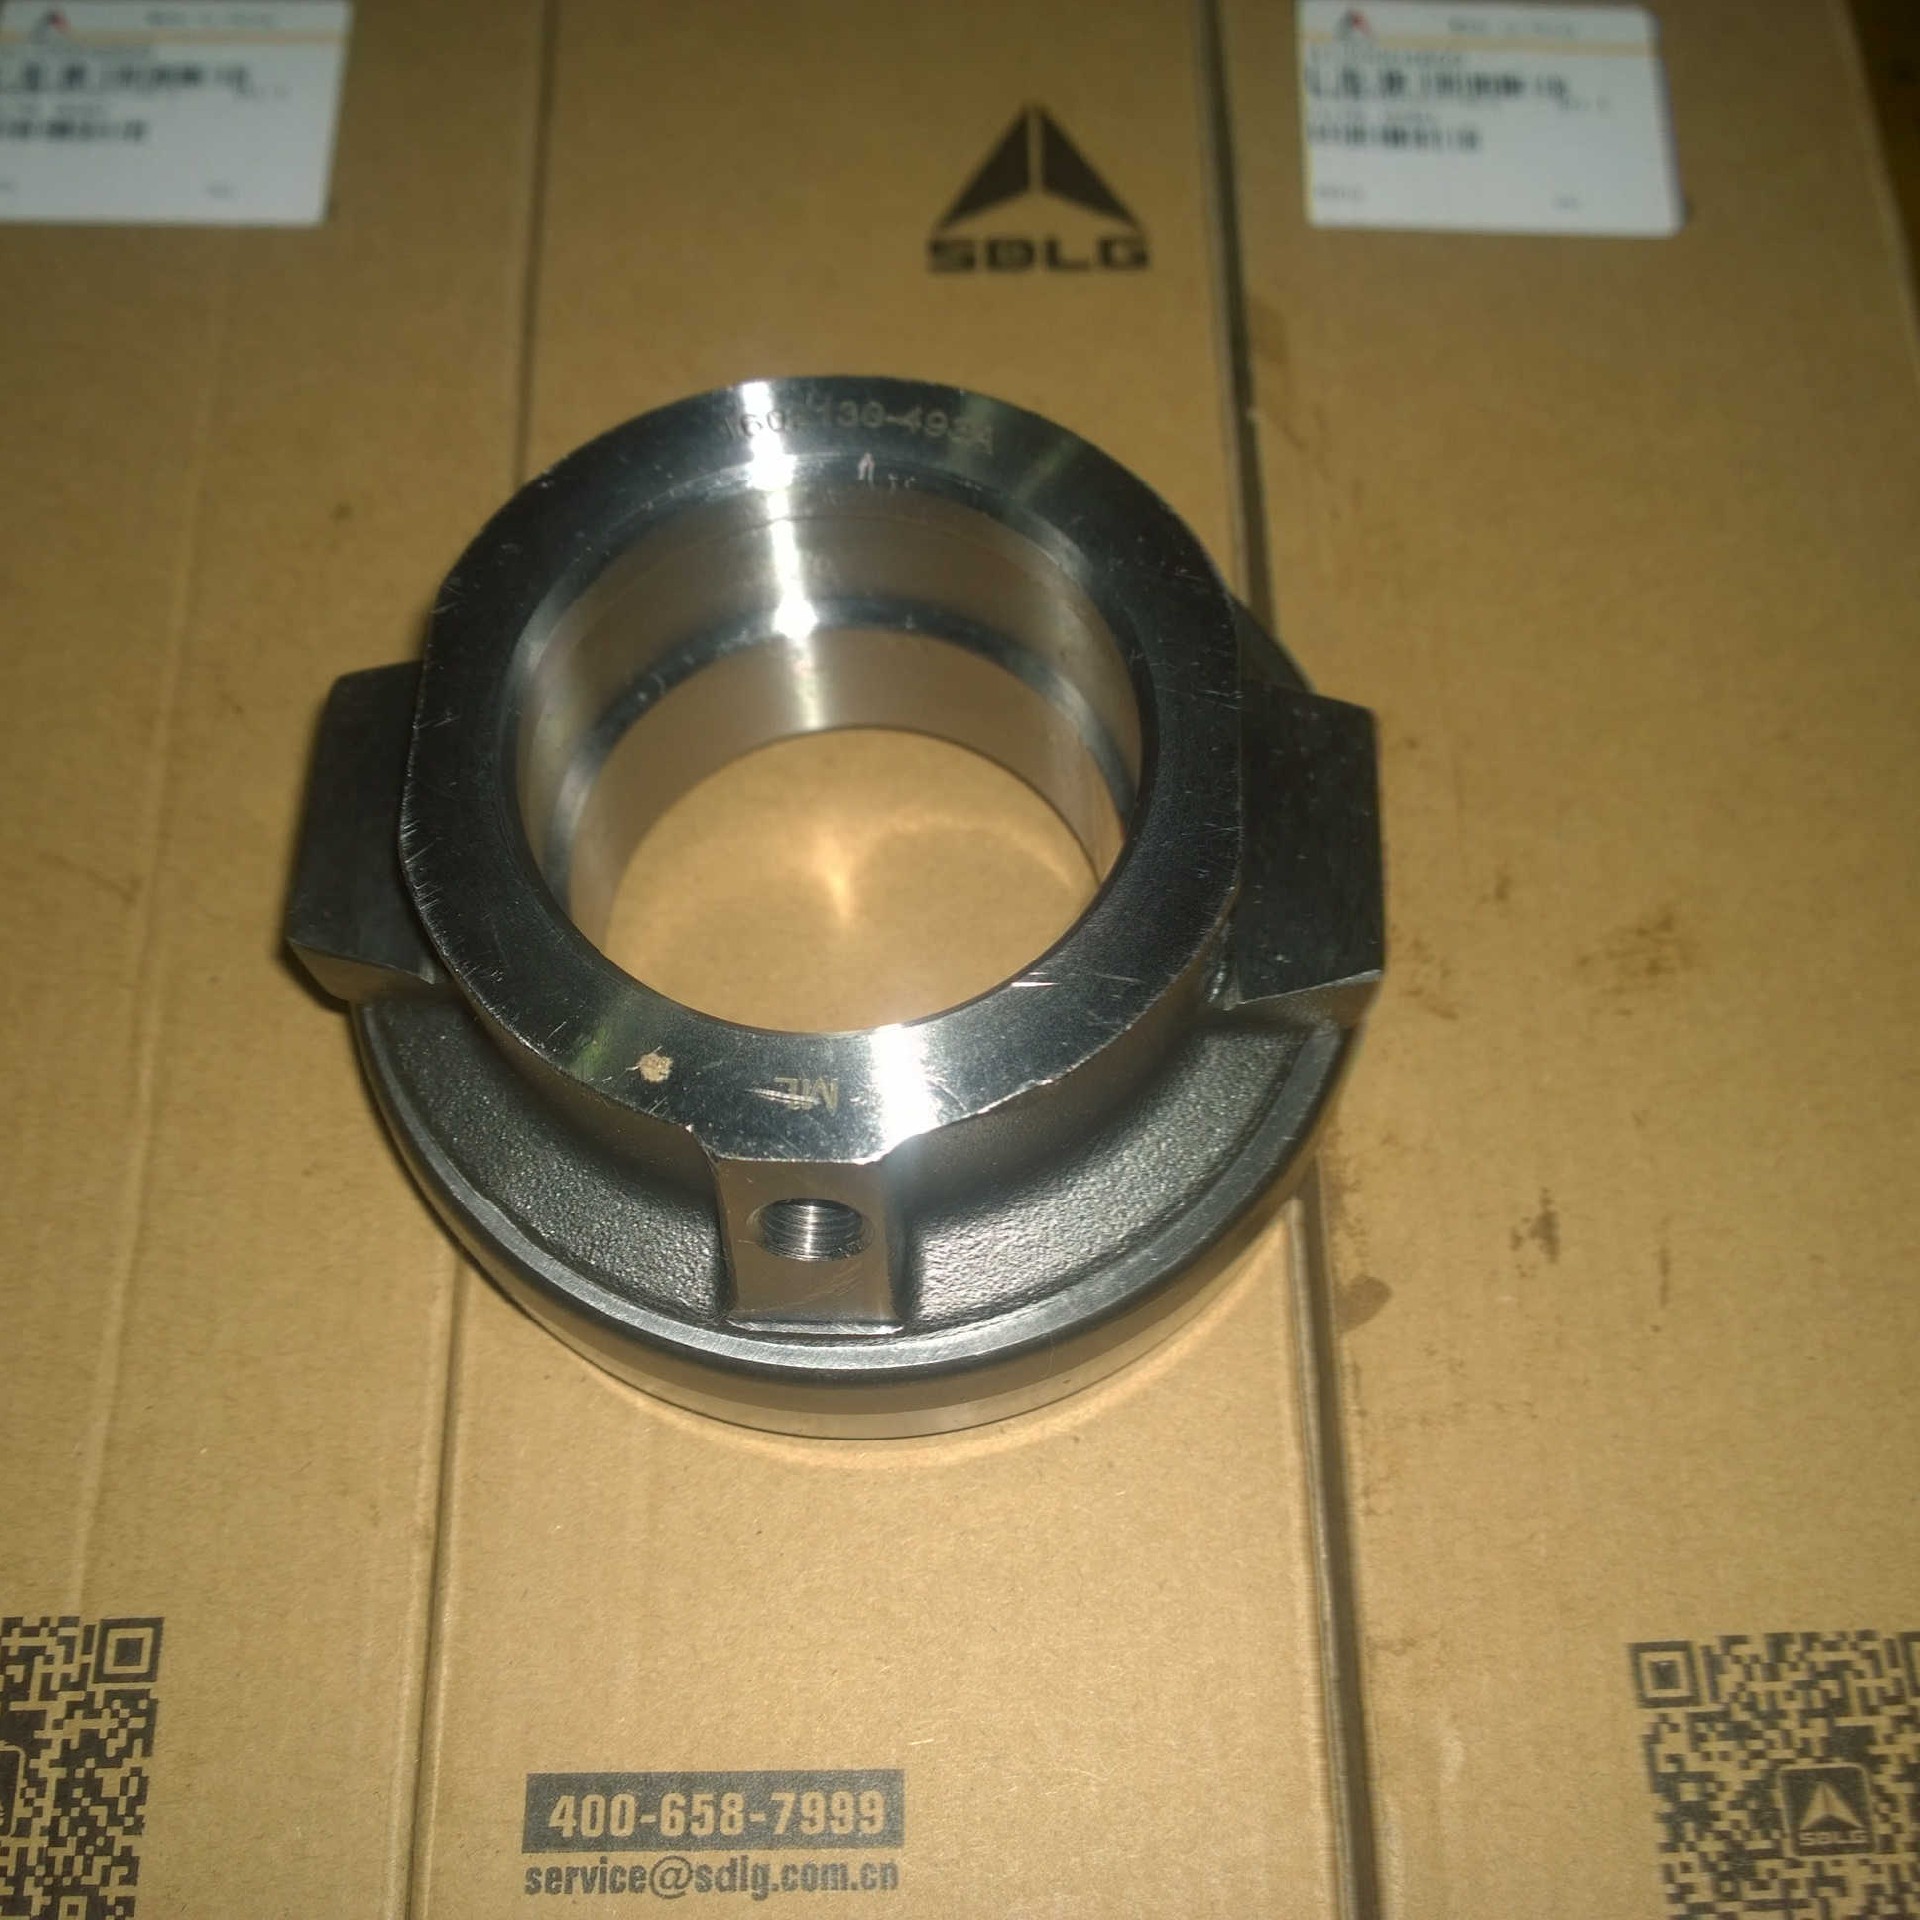 4110001121010		Release bearing and seat assembly